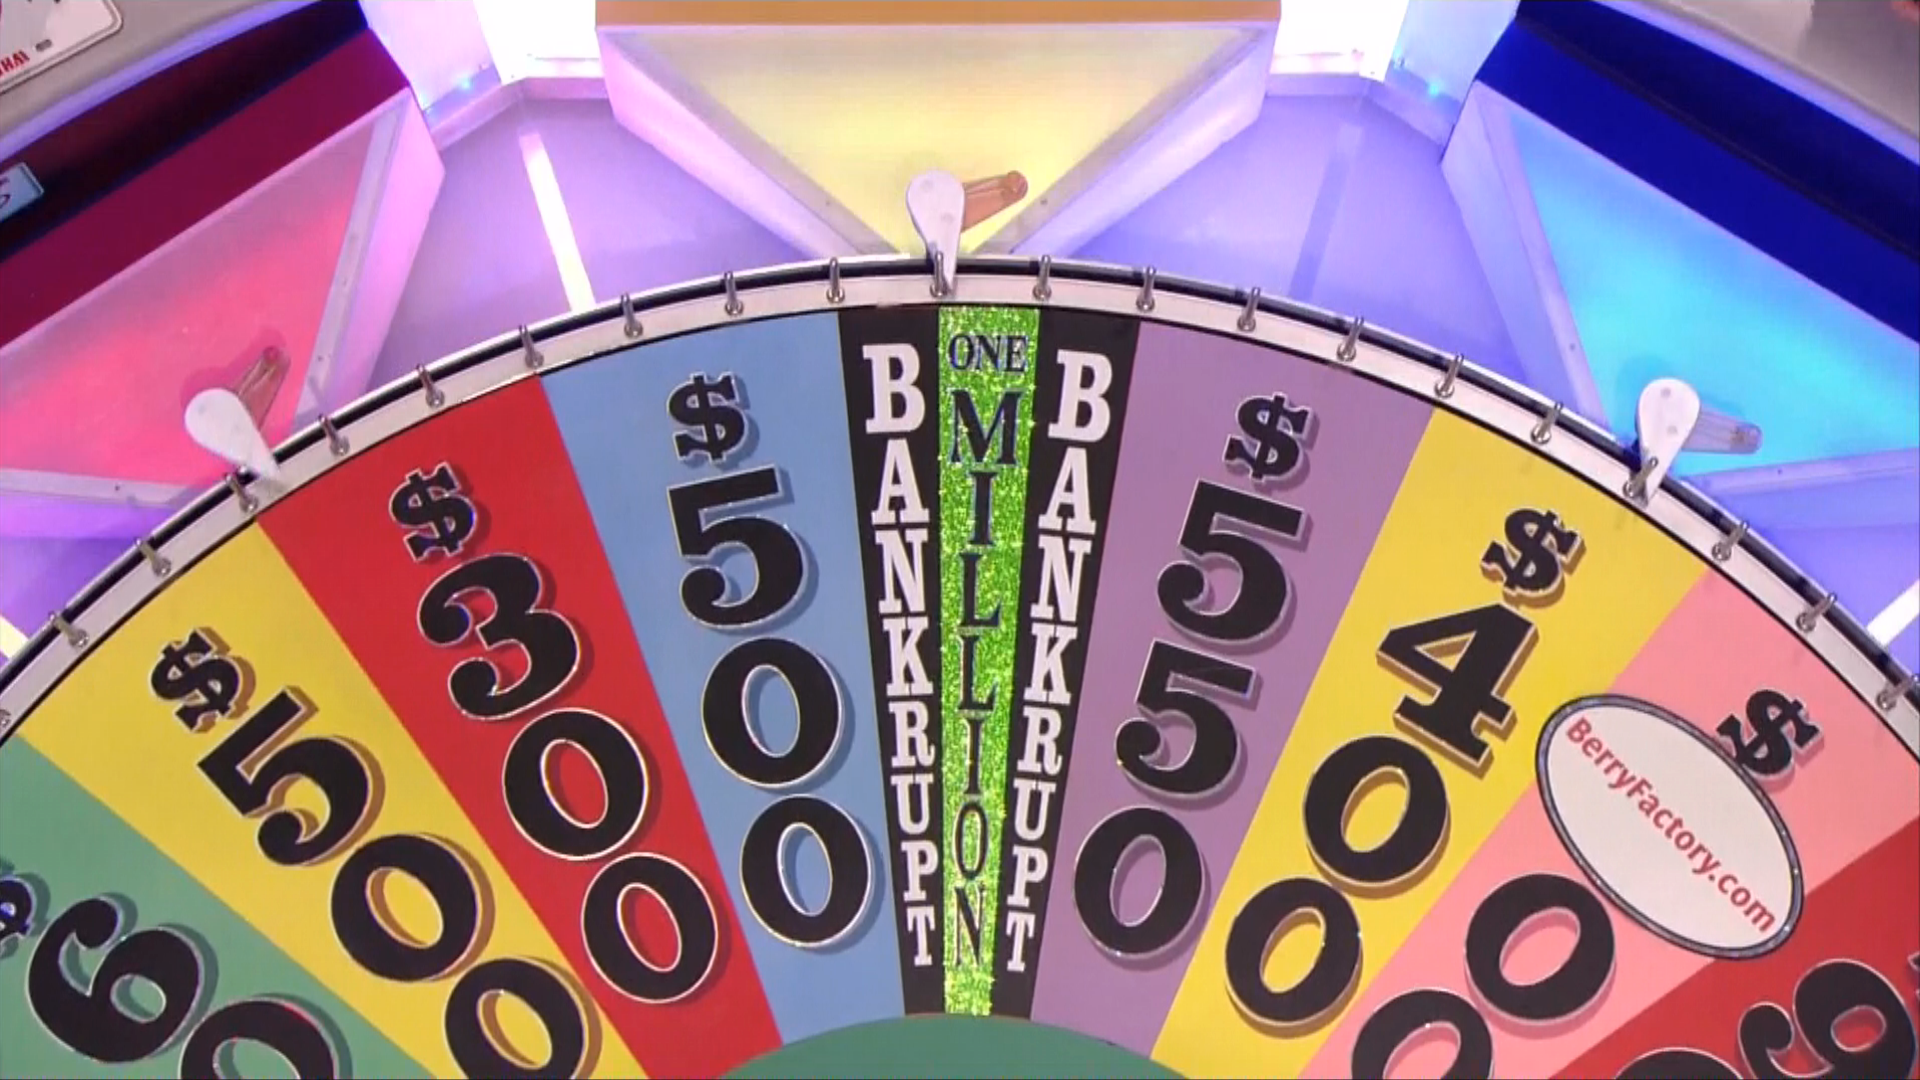 casinos that have wheel of fortune game